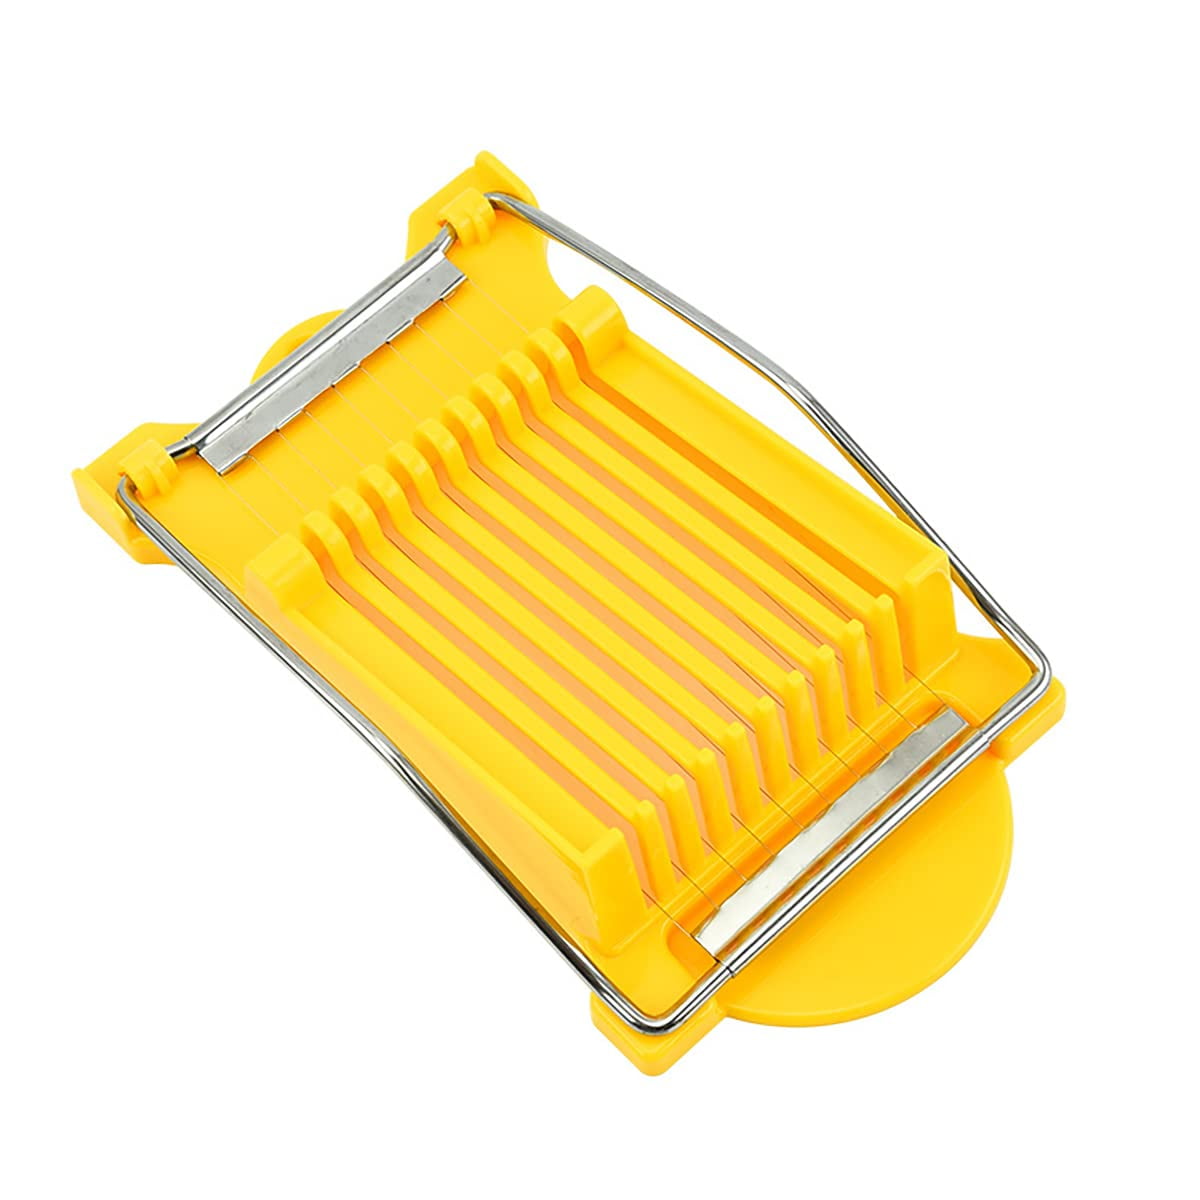 NVTED Luncheon Meat Slicer, Boiled Egg Fruit Soft Cheese Slicer Cutter,  Stainless Steel Wires, Cuts 10 Slices (White)